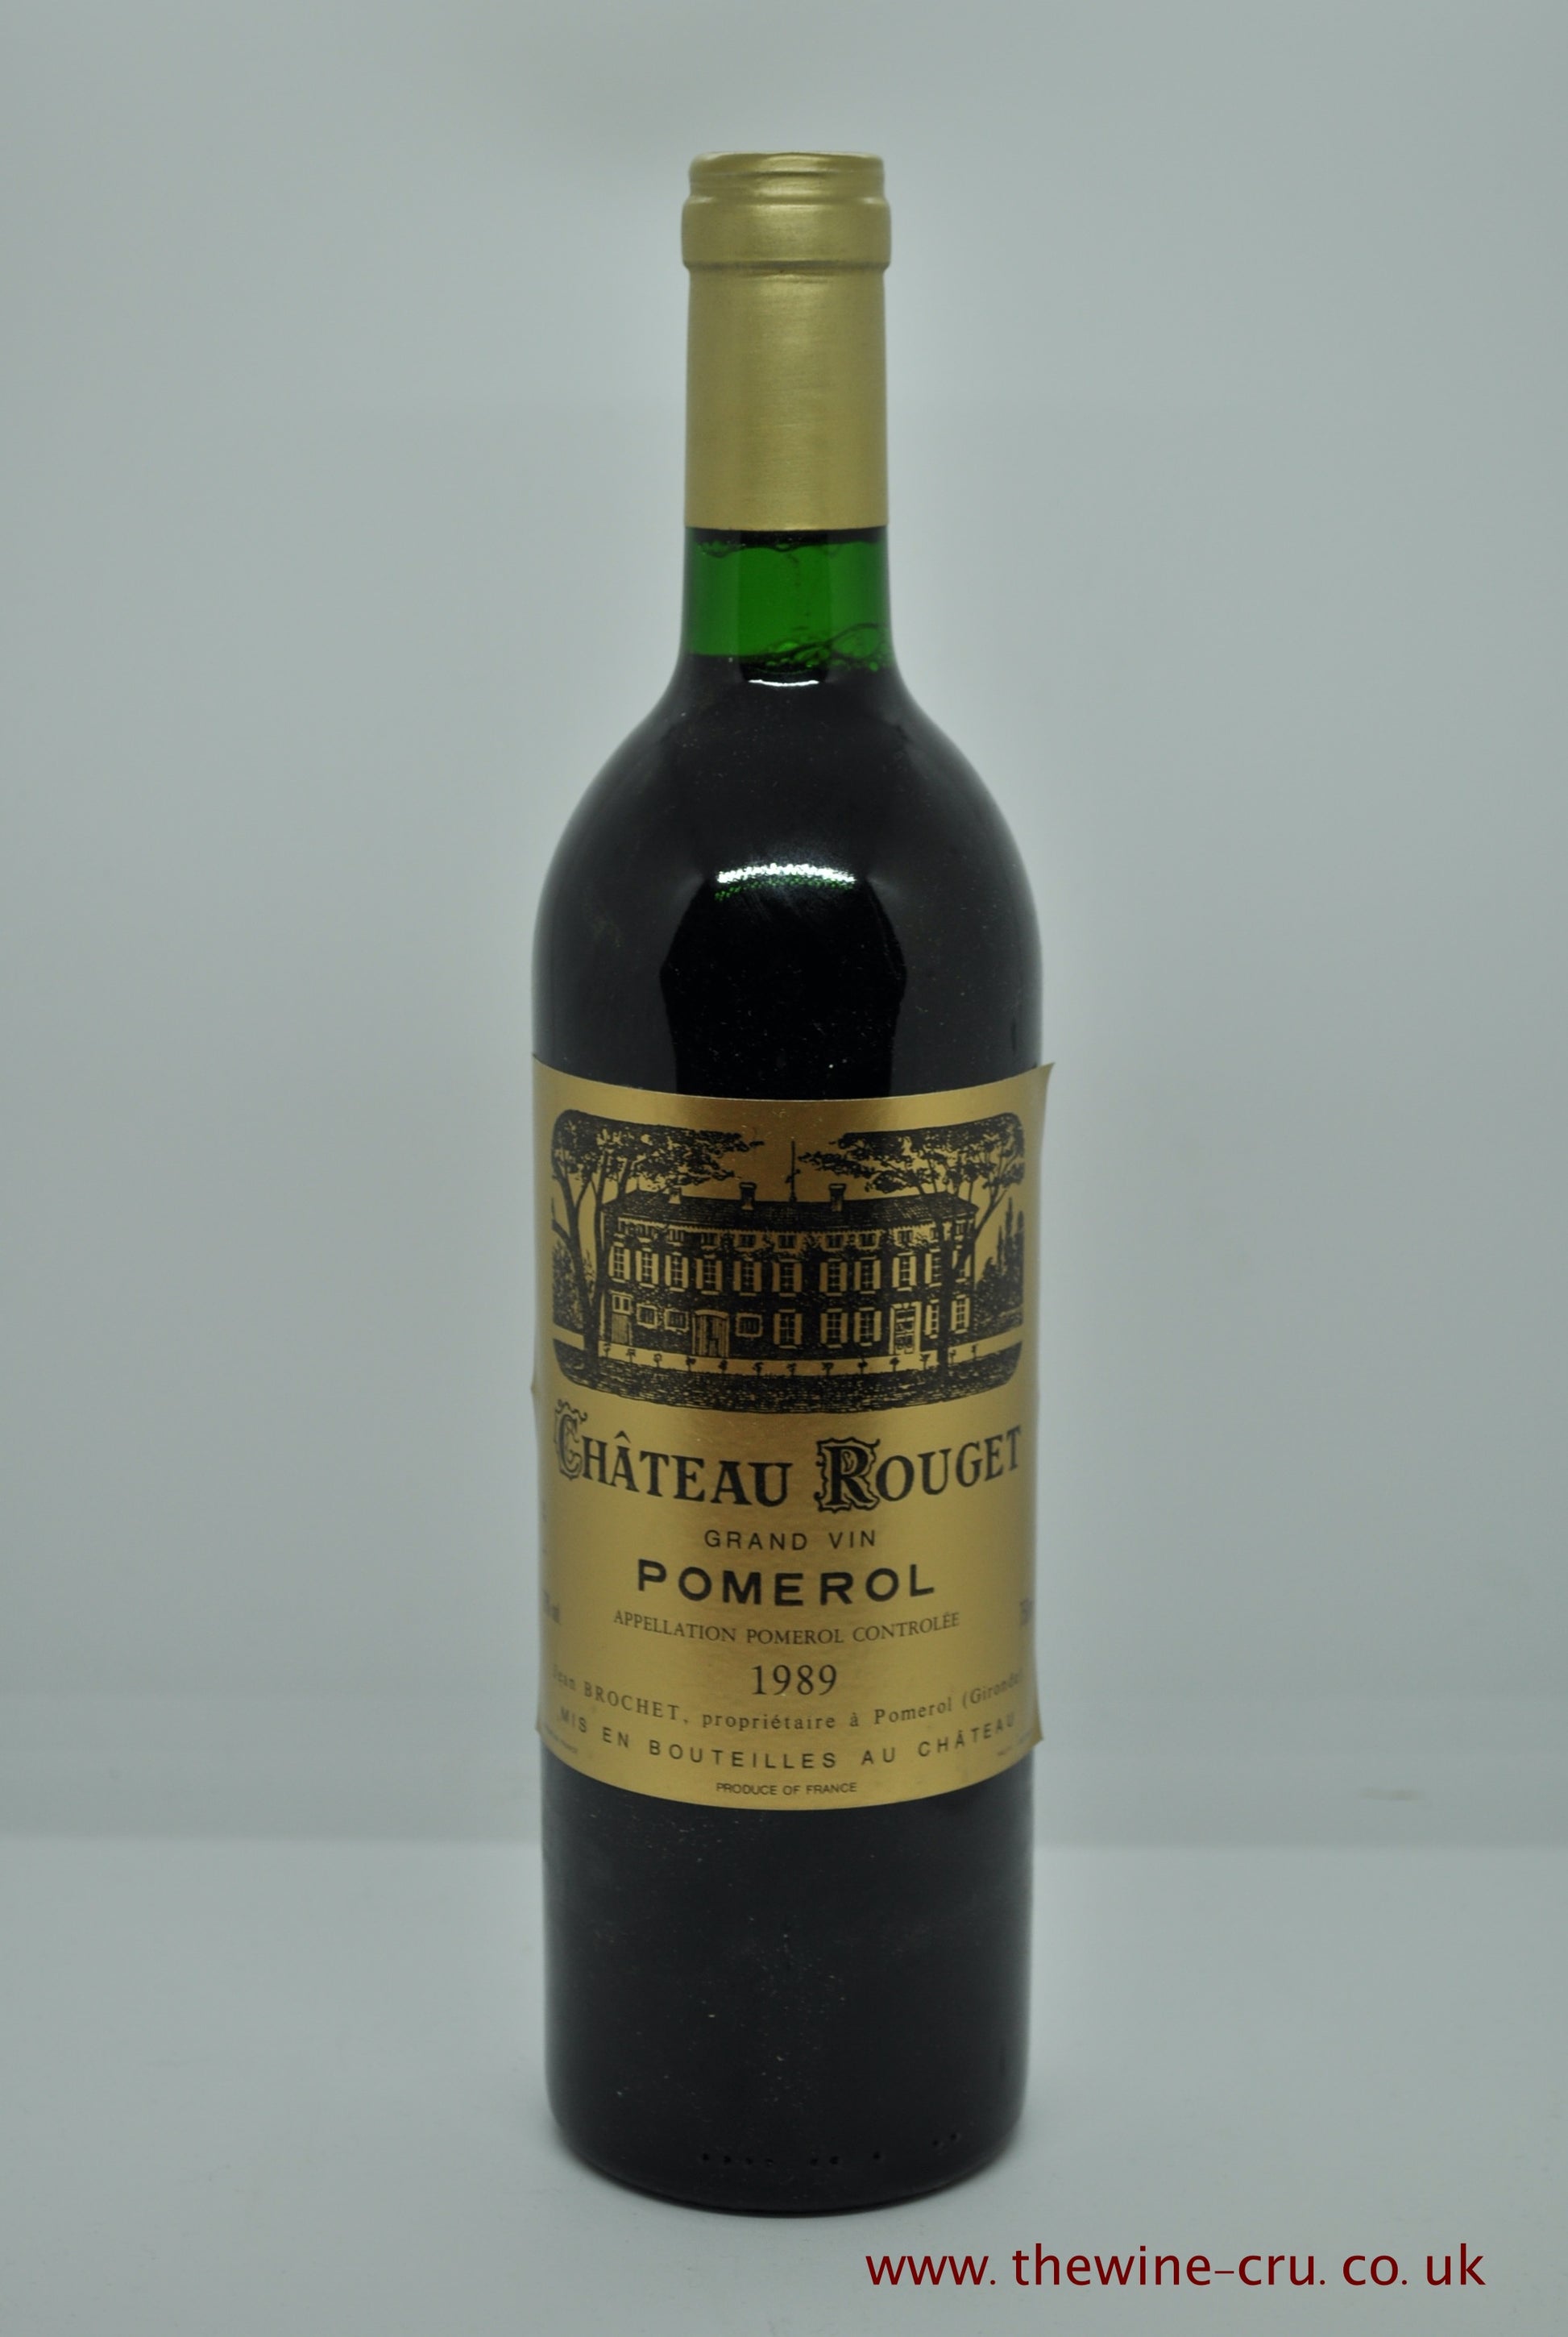 1989 vintage red wine from Chateau Rouget, France, Bordeaux, Pomerol. Capsule and label very good. Wine level base of neck. Immediate delivery. free local delivery. Gift wrapping available.